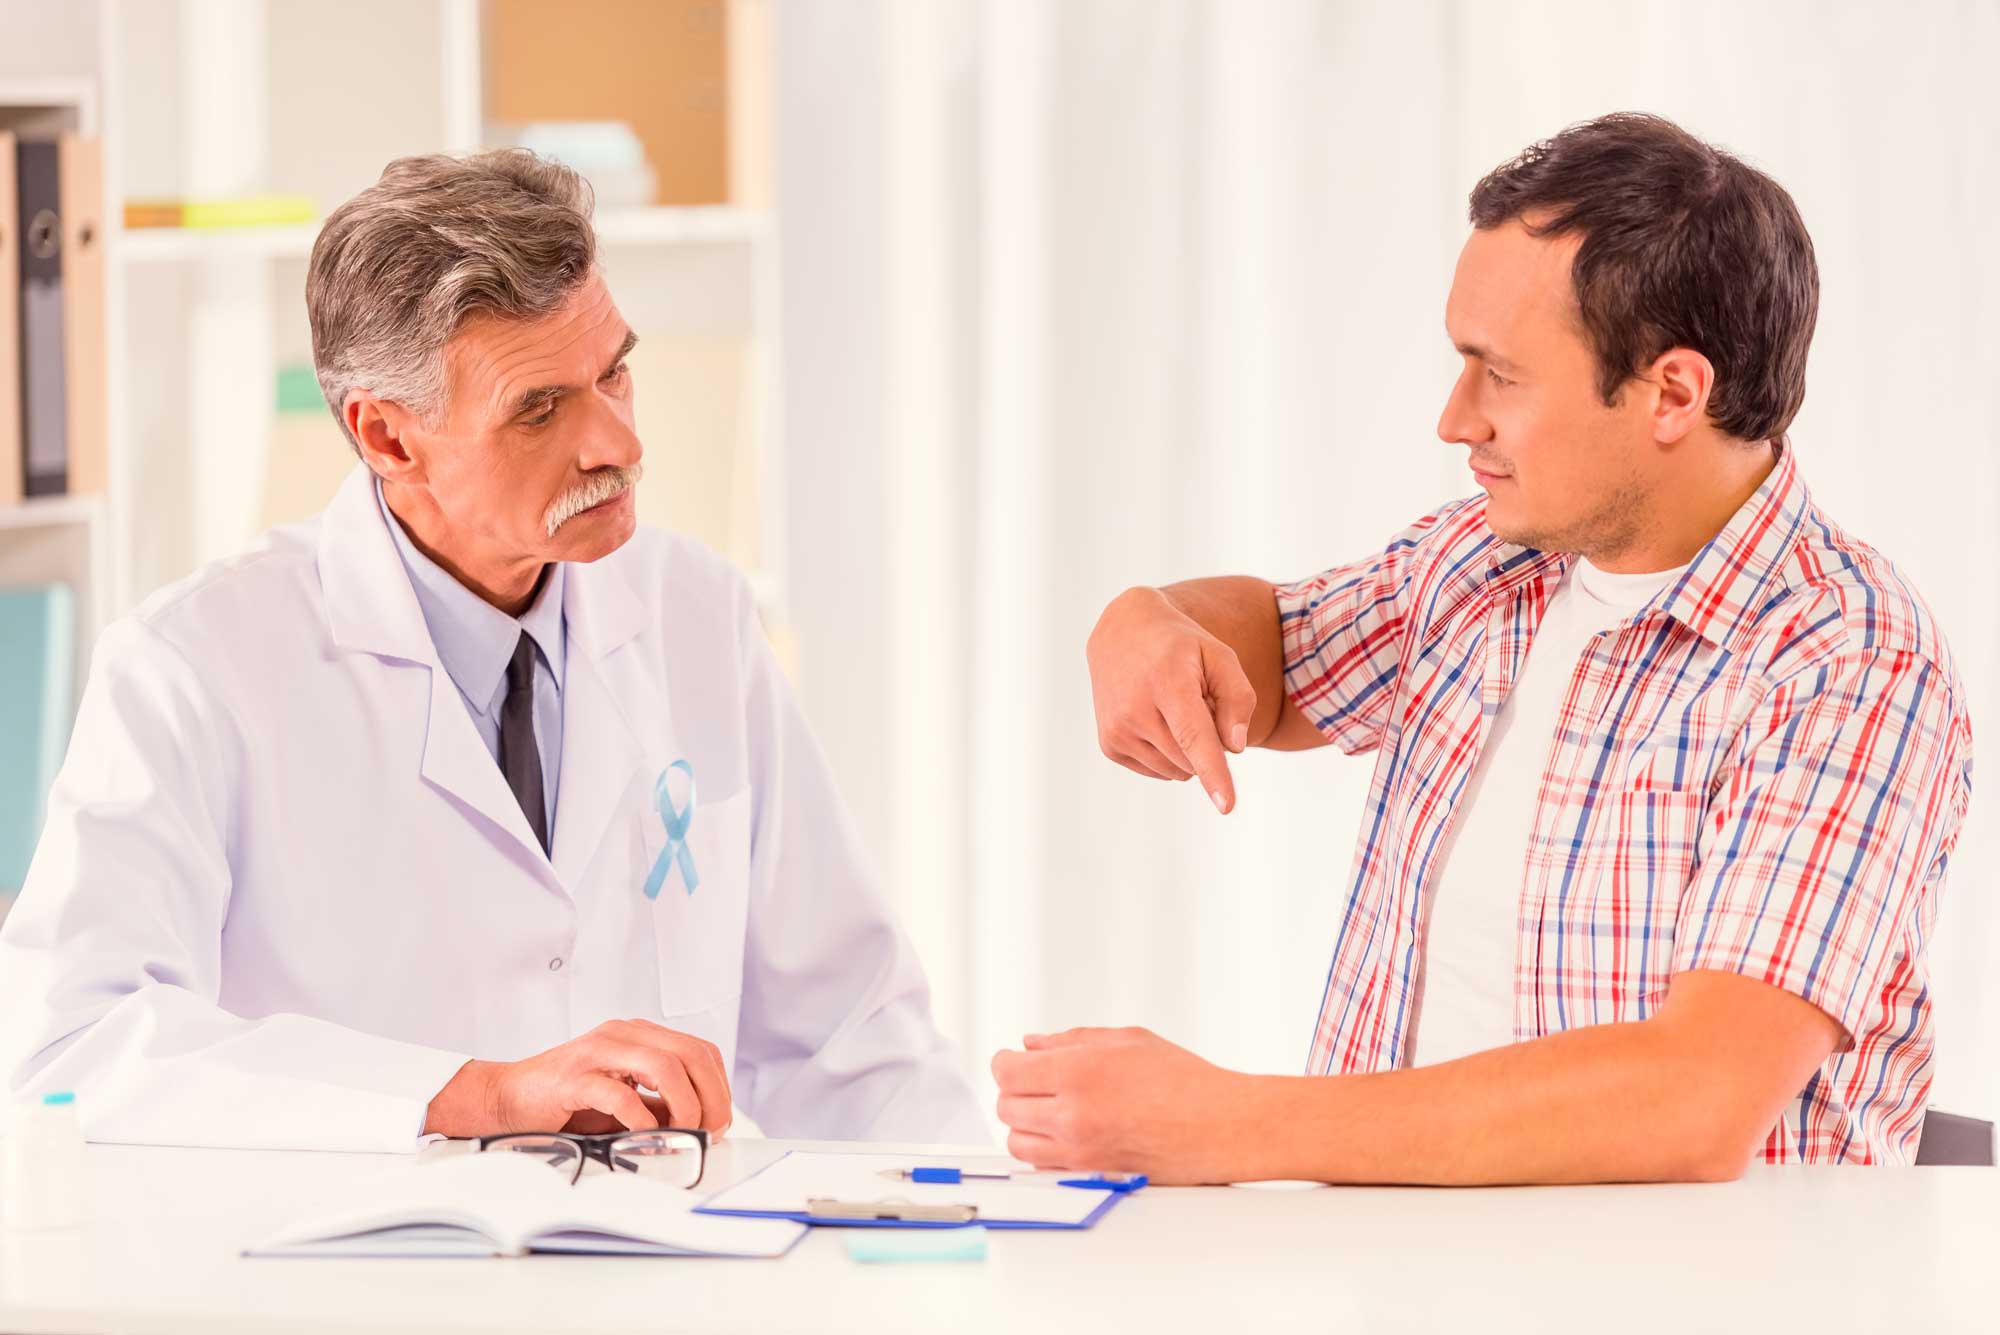 patient explaining issue to doctor